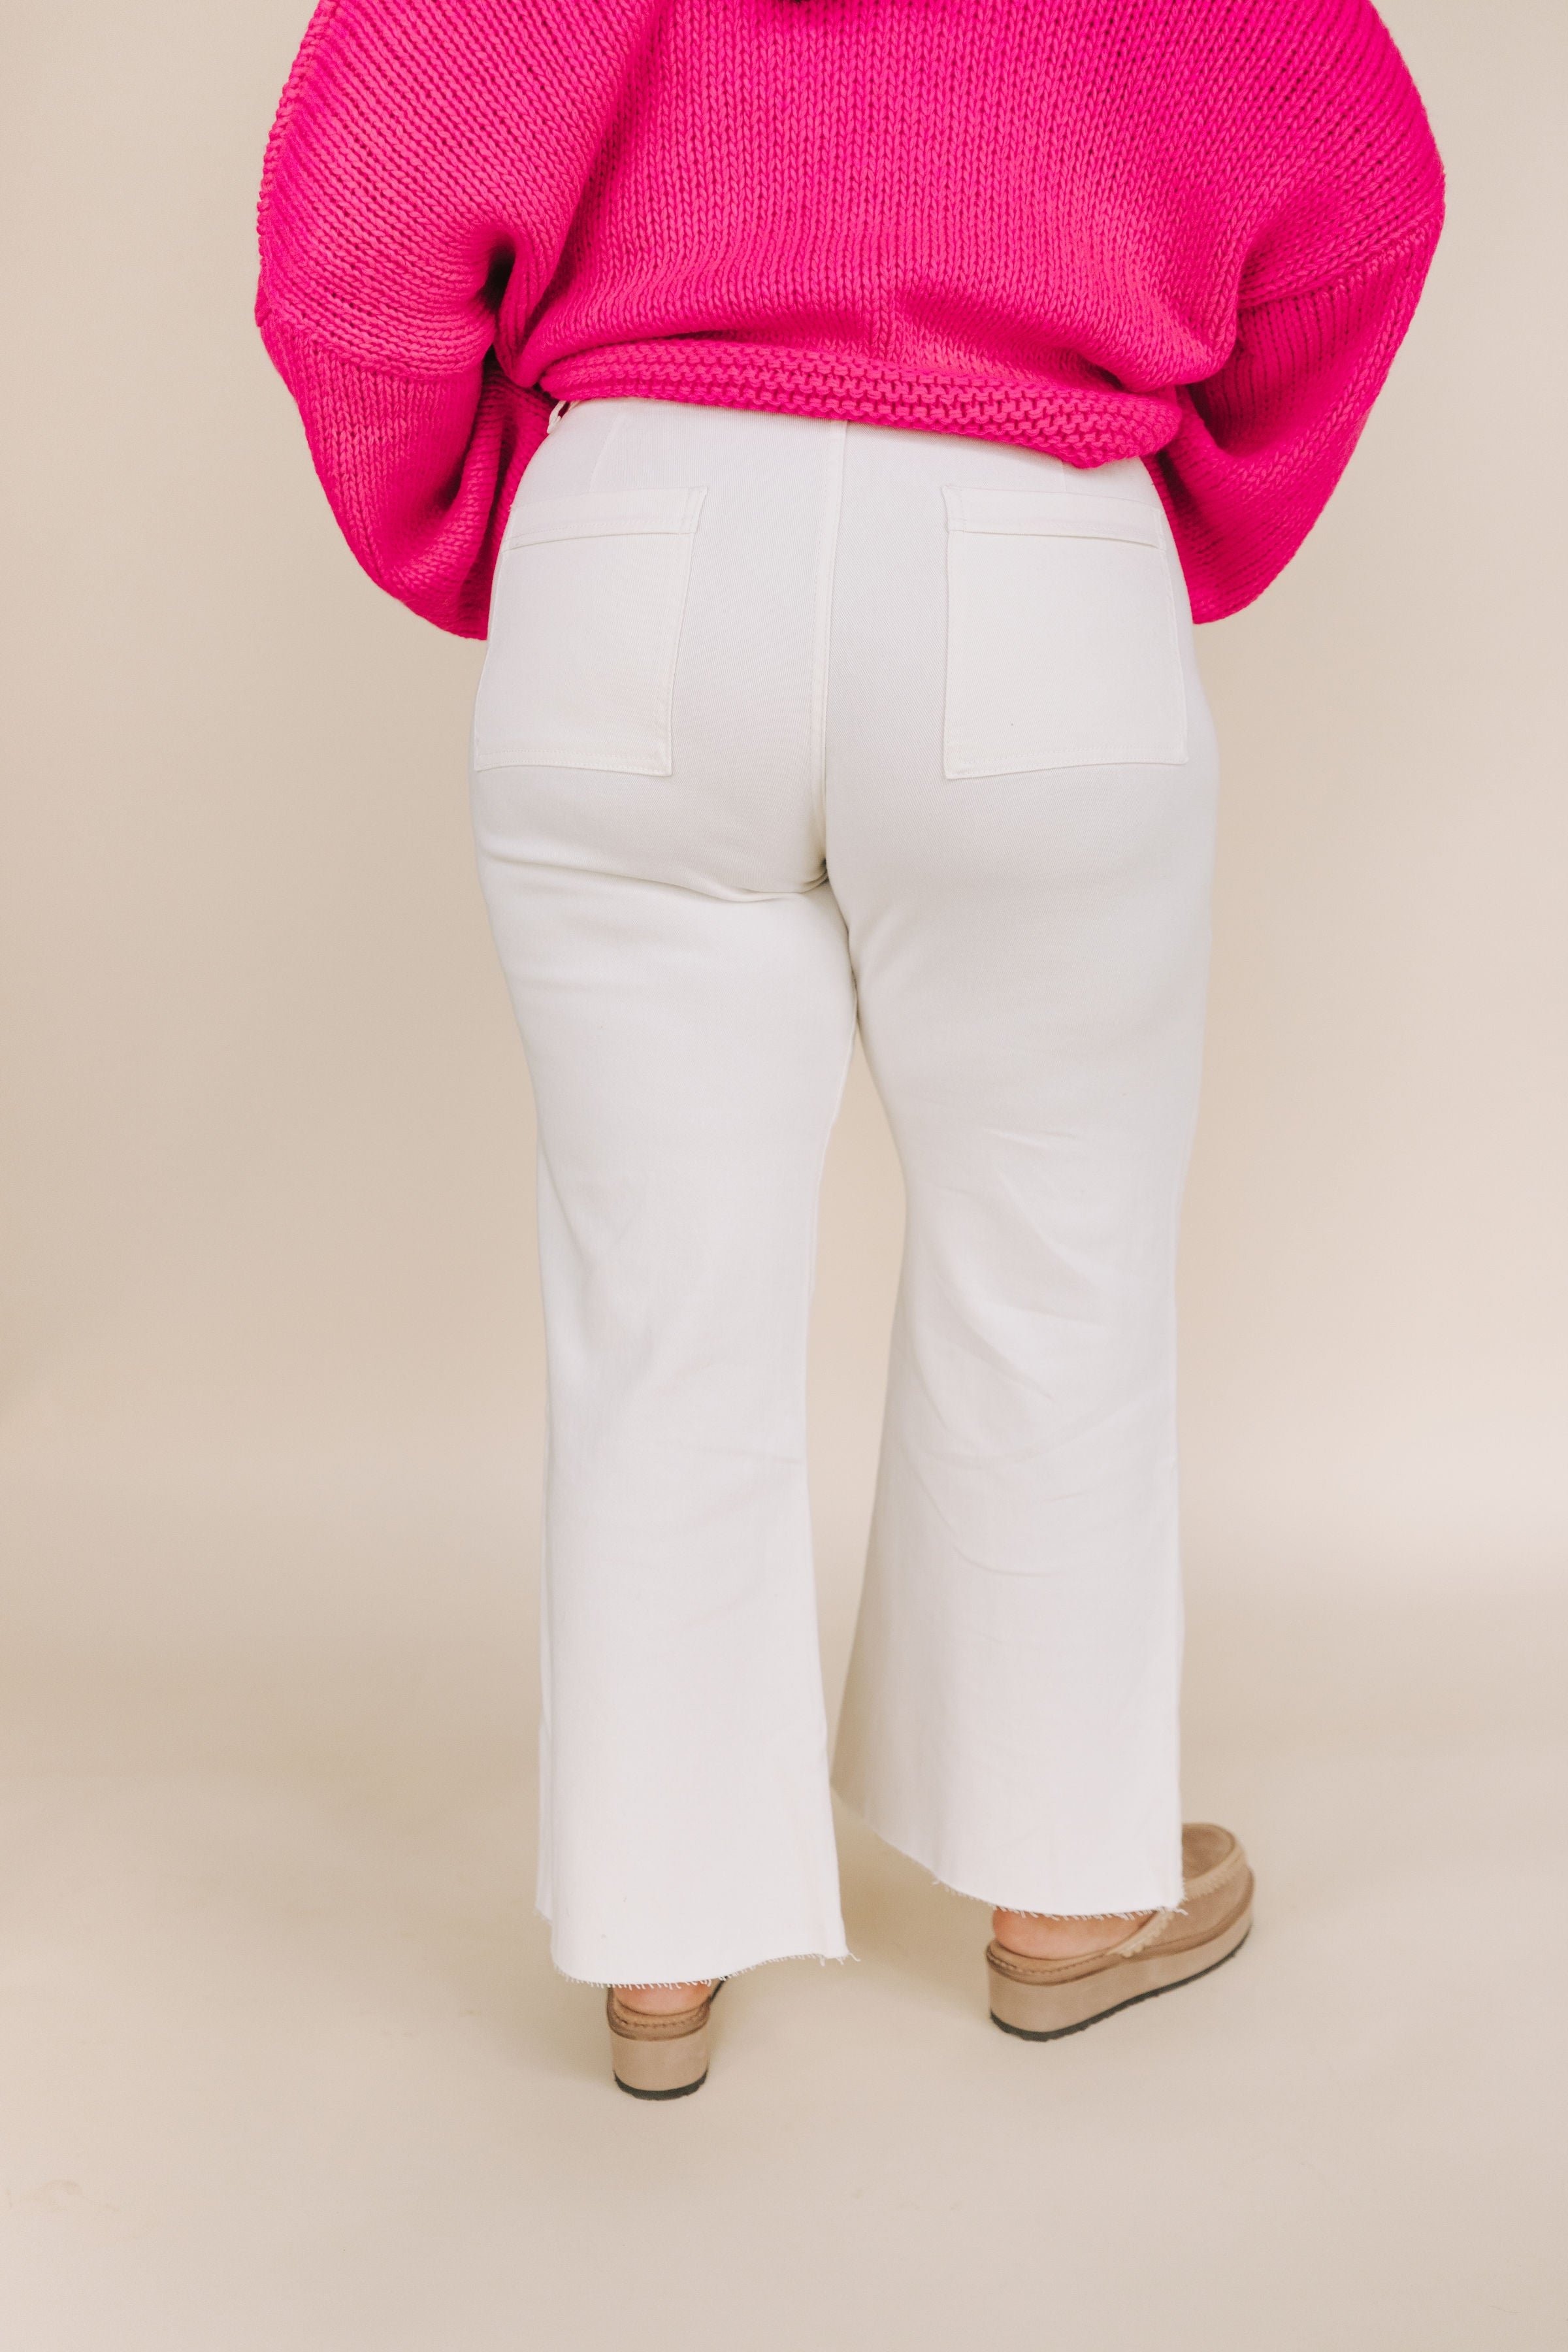 PLUS SIZE - Style In Motion Pants